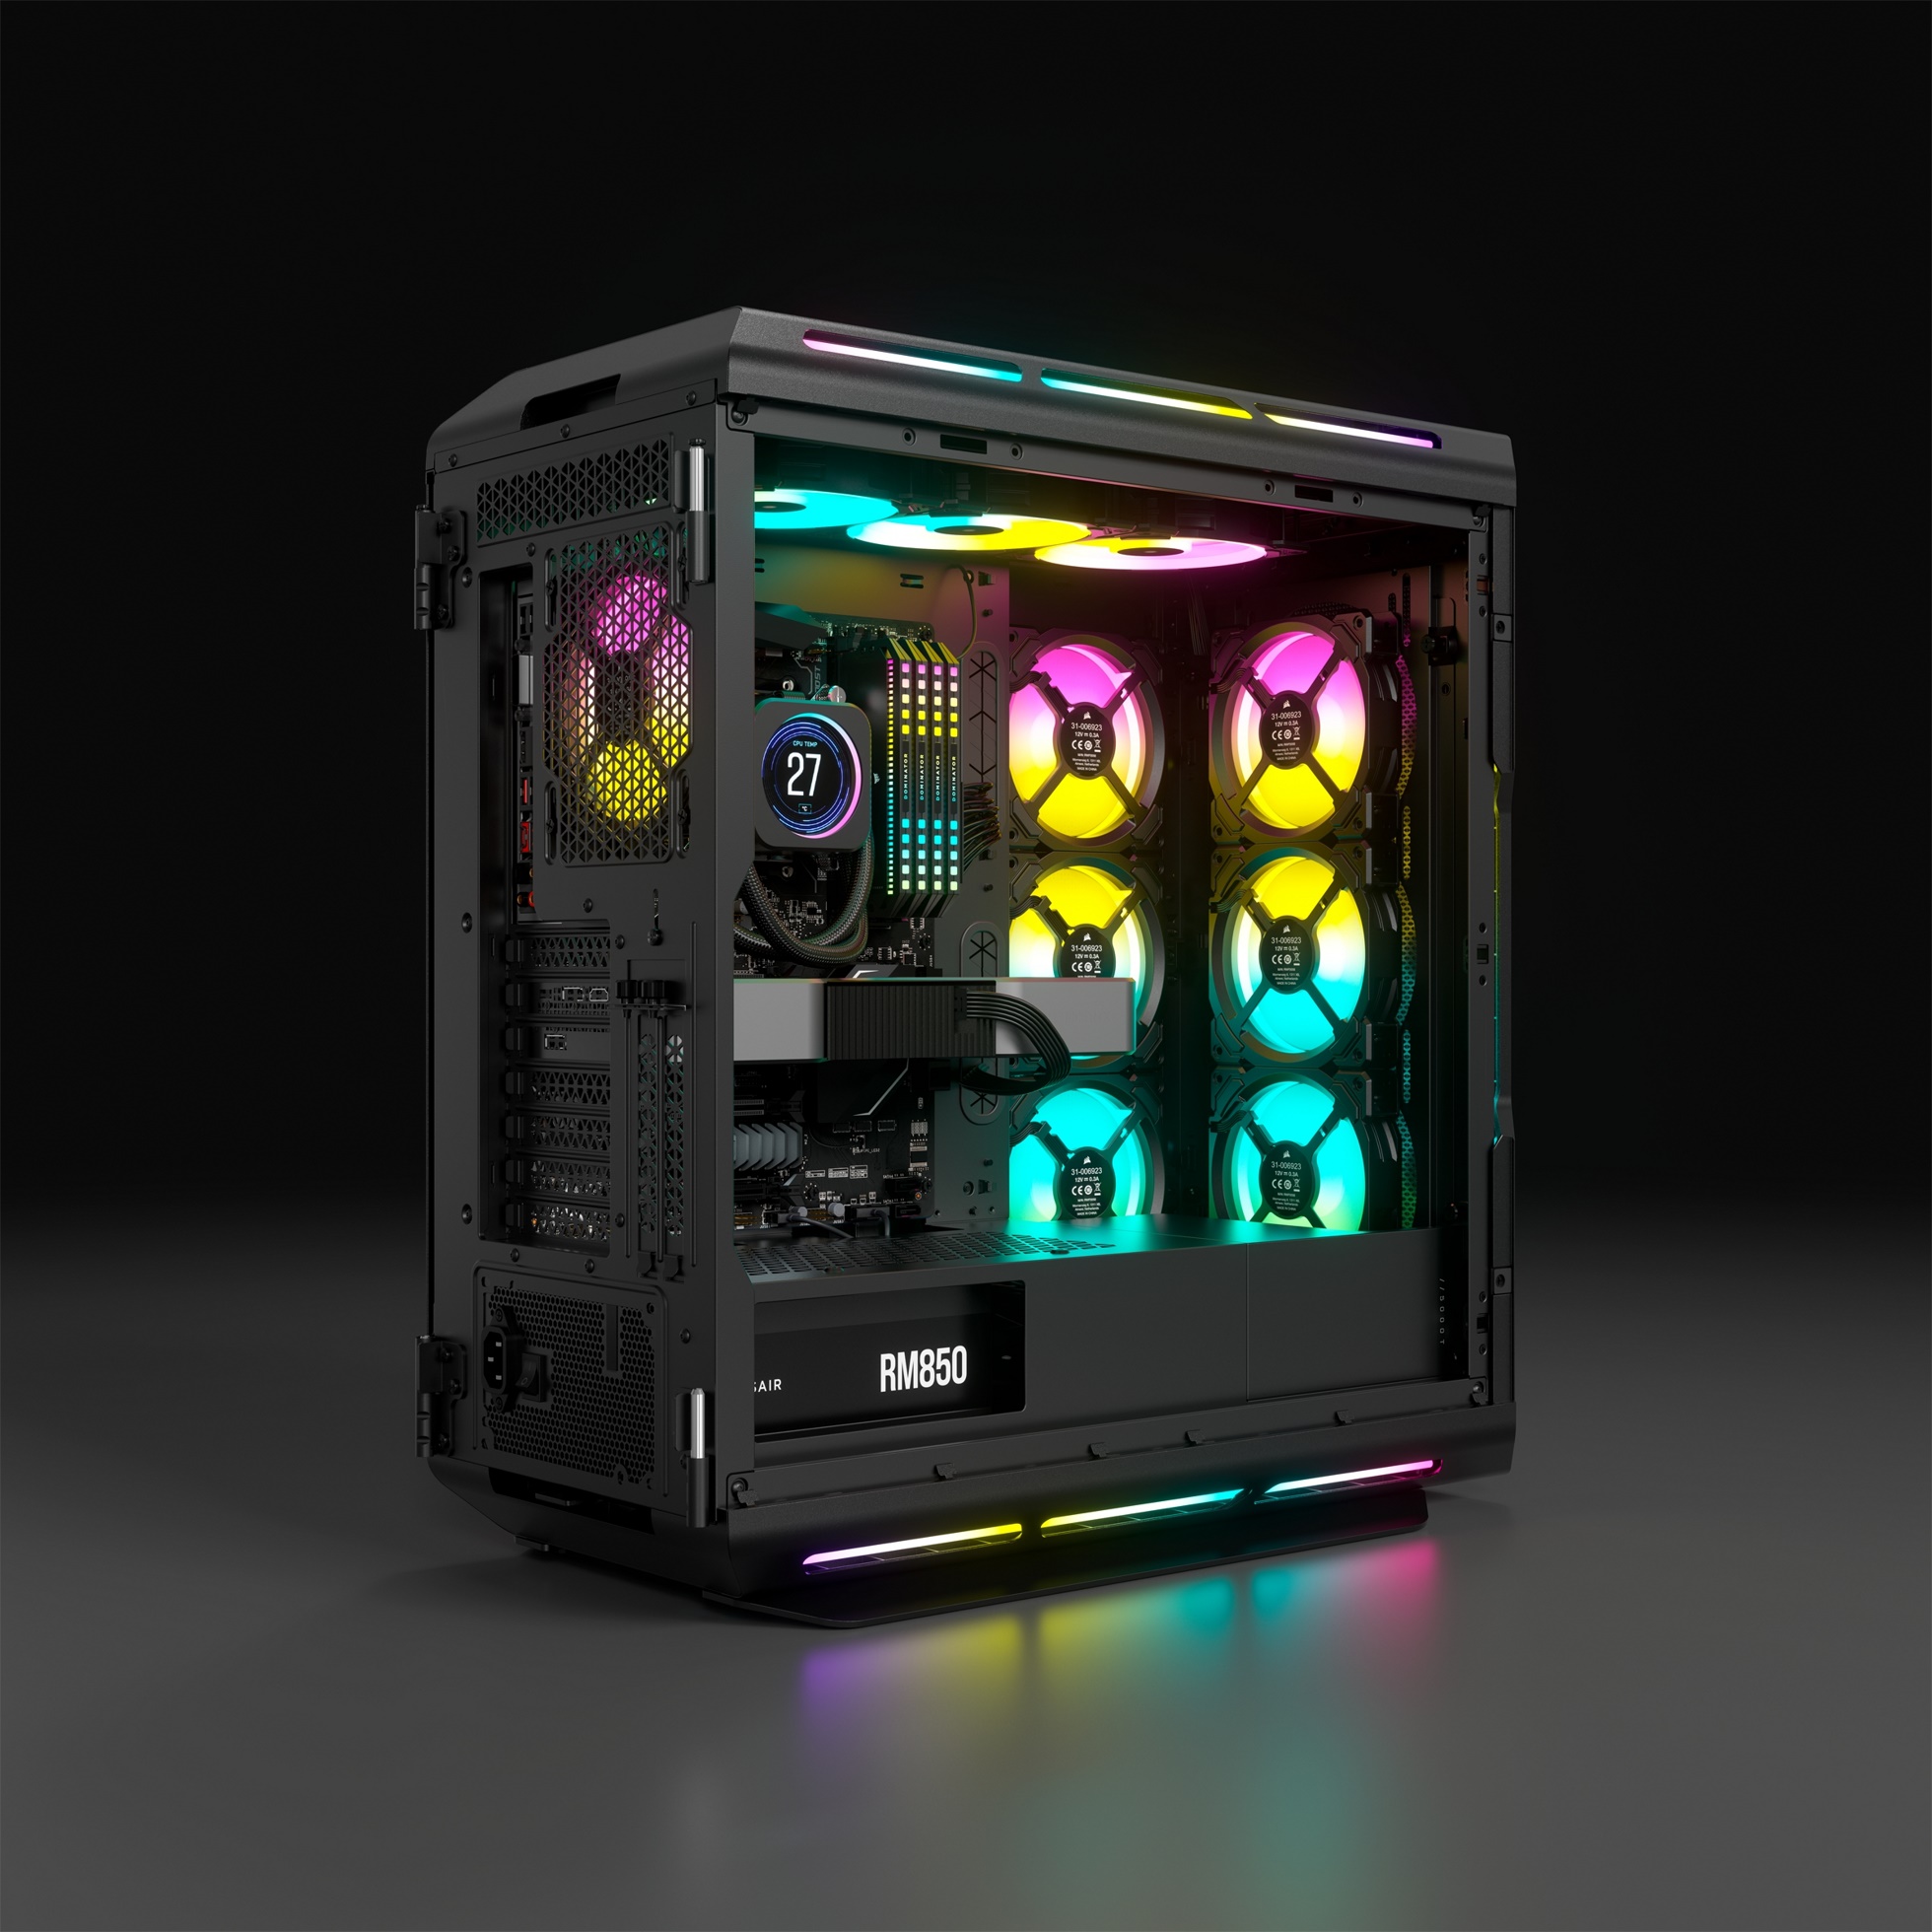 overkill with mid-tower | 5000T iCUE absolute review - CORSAIR case high-end RGB in igor´sLAB RGB